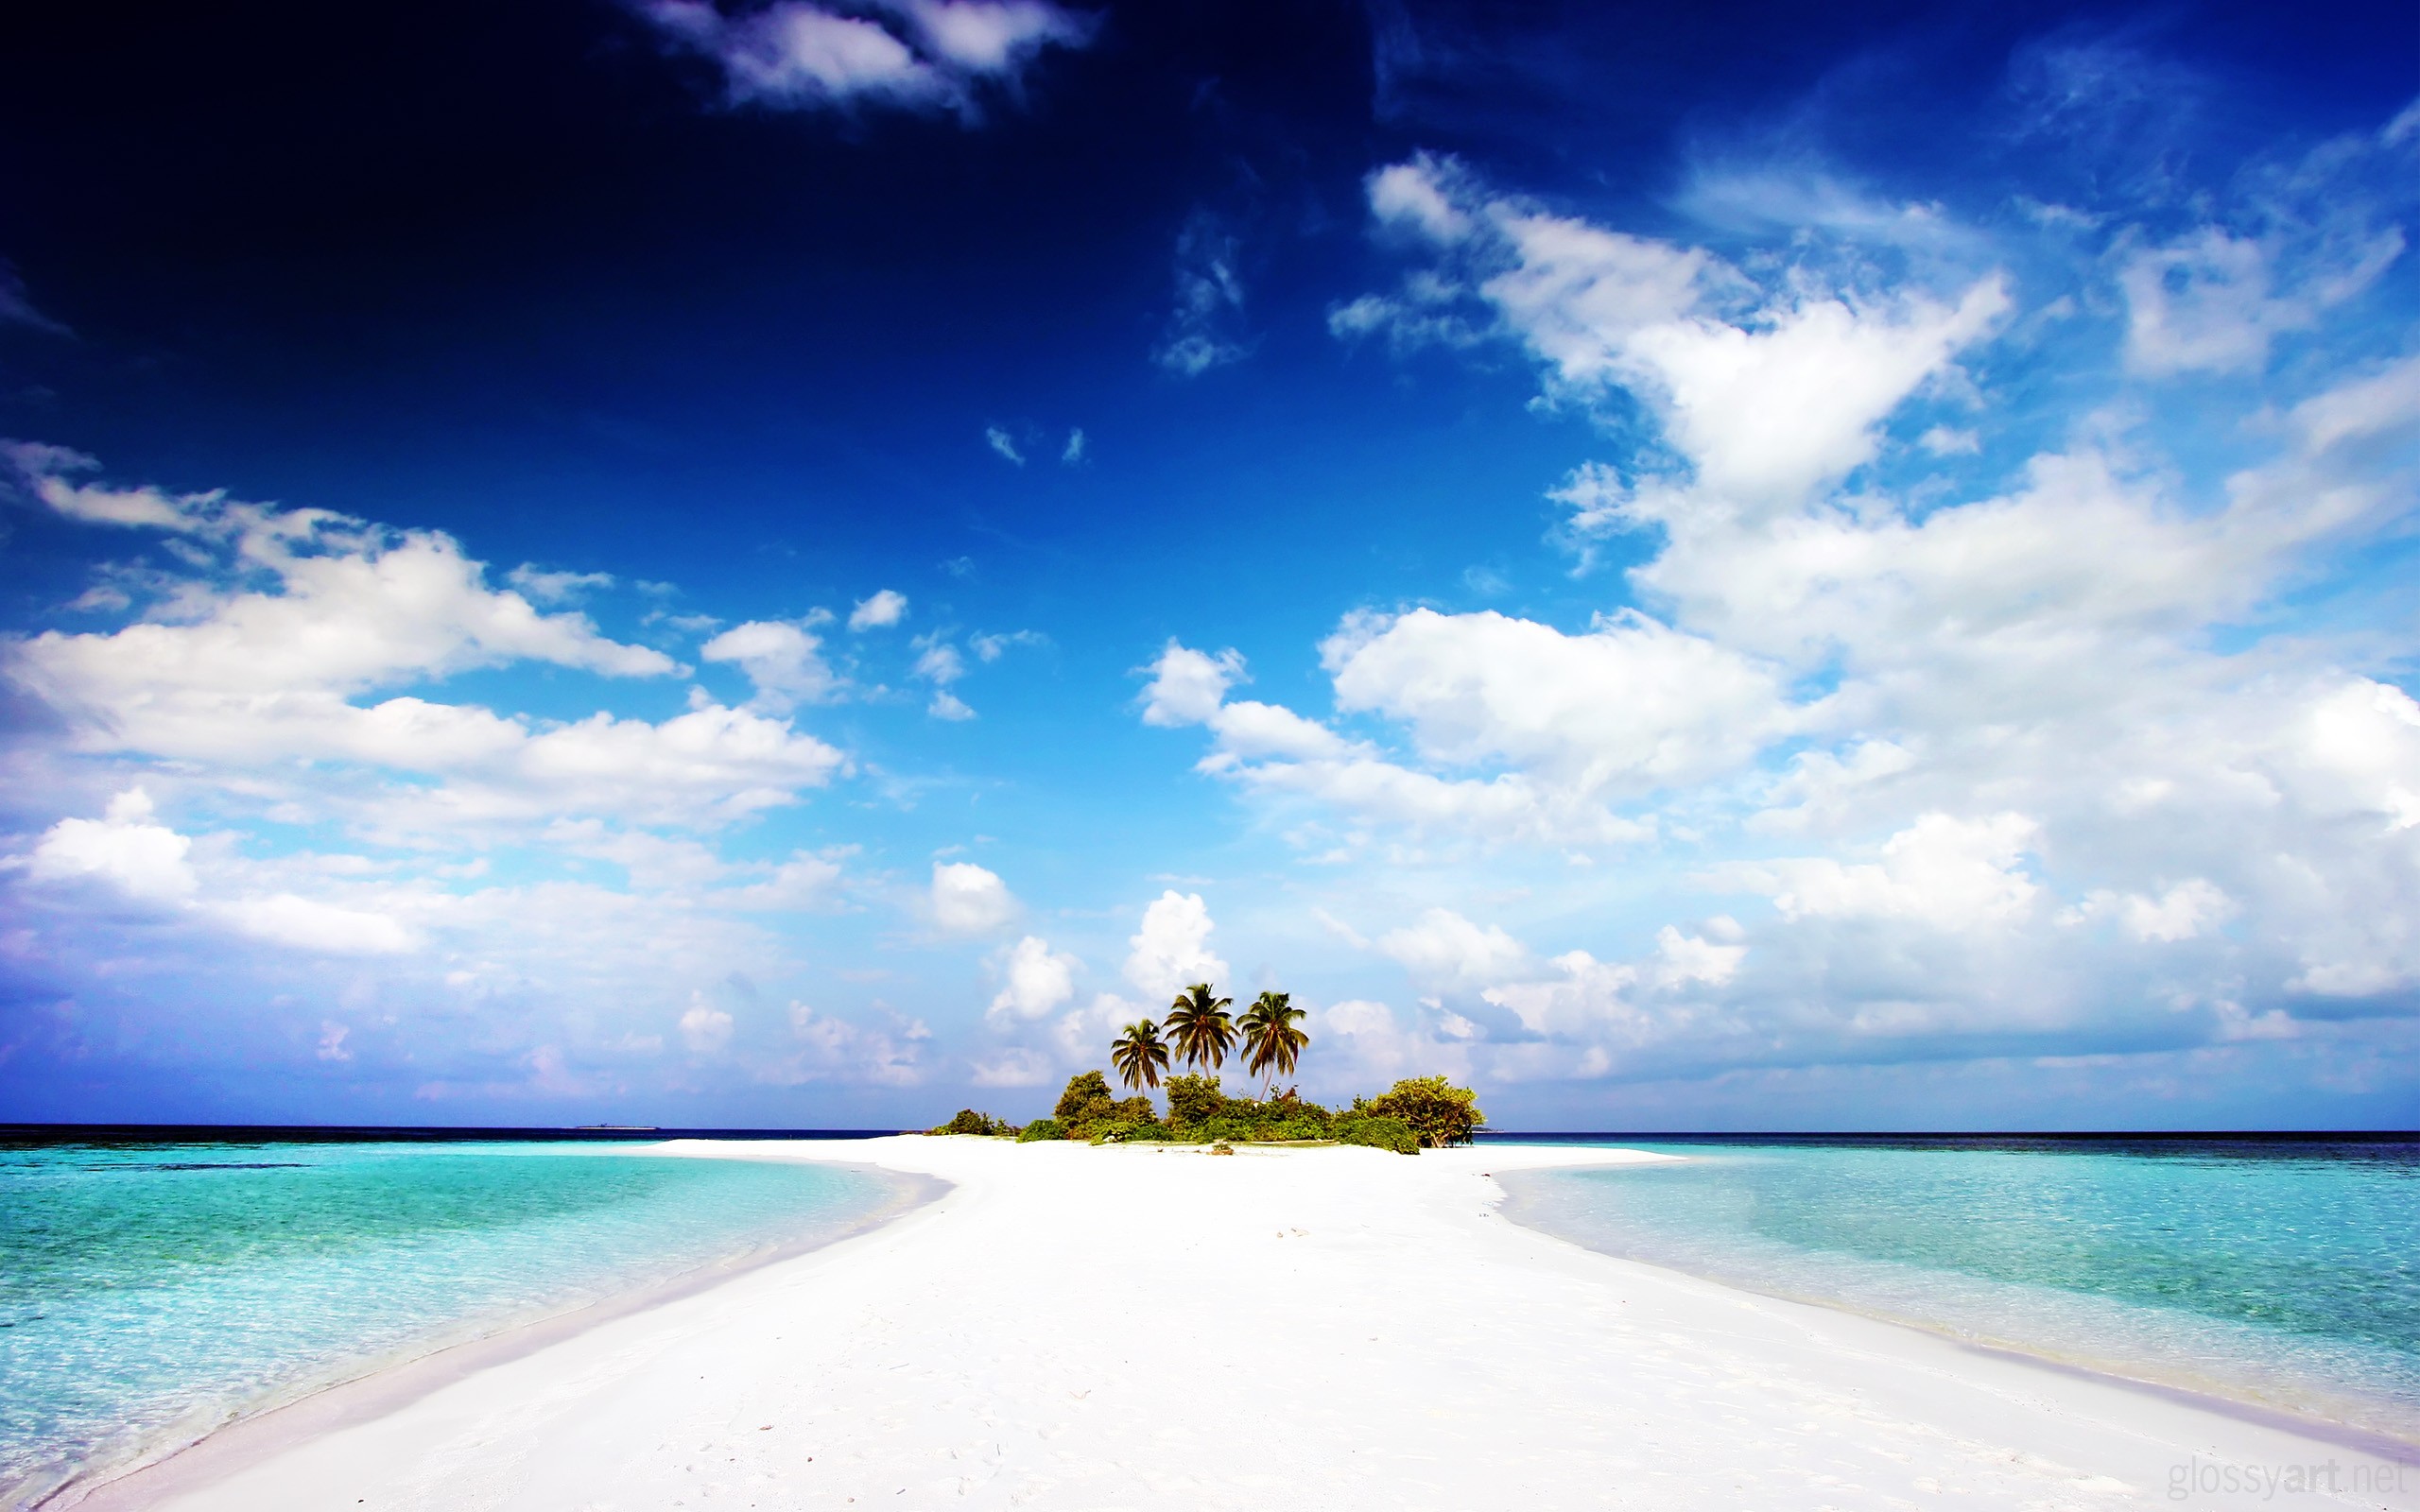 General 2560x1600 photography nature water sea tropical island clouds sand beach sky